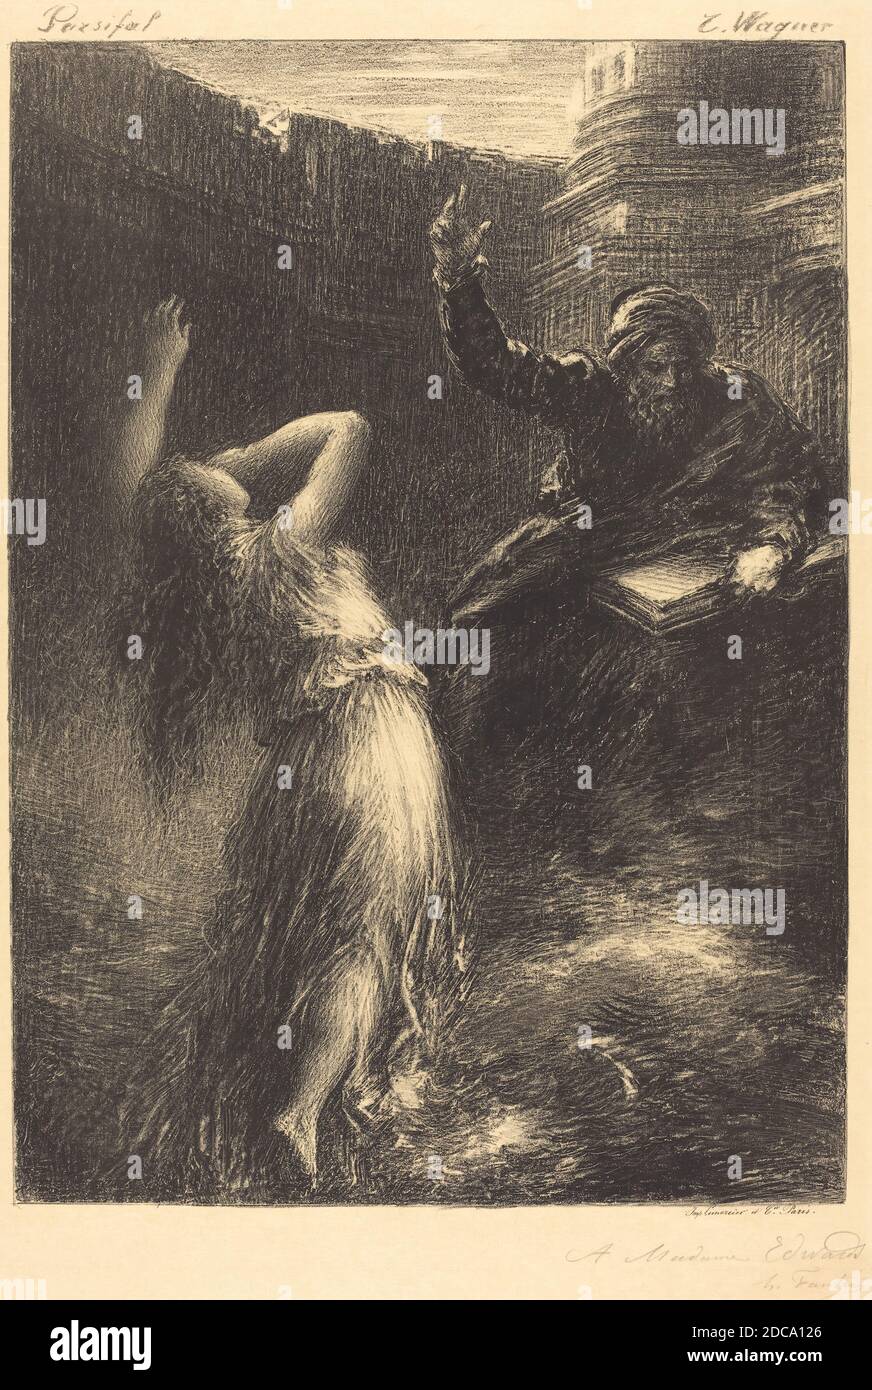 Henri Fantin-Latour, (artist), French, 1836 - 1904, Evocation of Kundry (2nd plate), Wagner's 'Parsifal', (series), 1883, lithograph Stock Photo